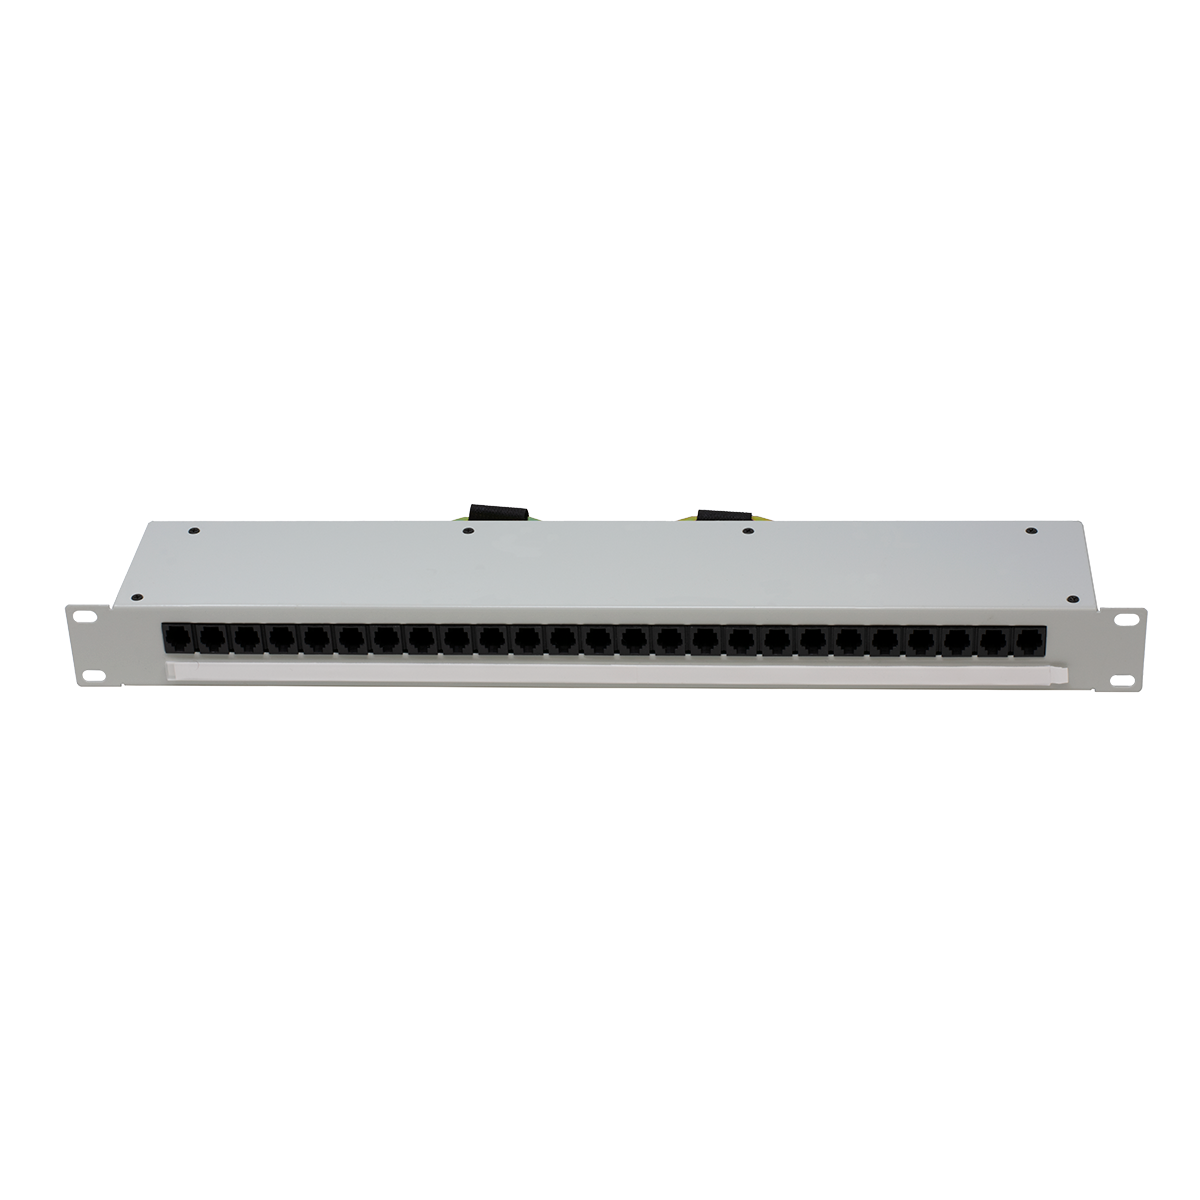 24 Port 2 Pair RJ-14 Patch Panel with 2 Female Amp (Front View)